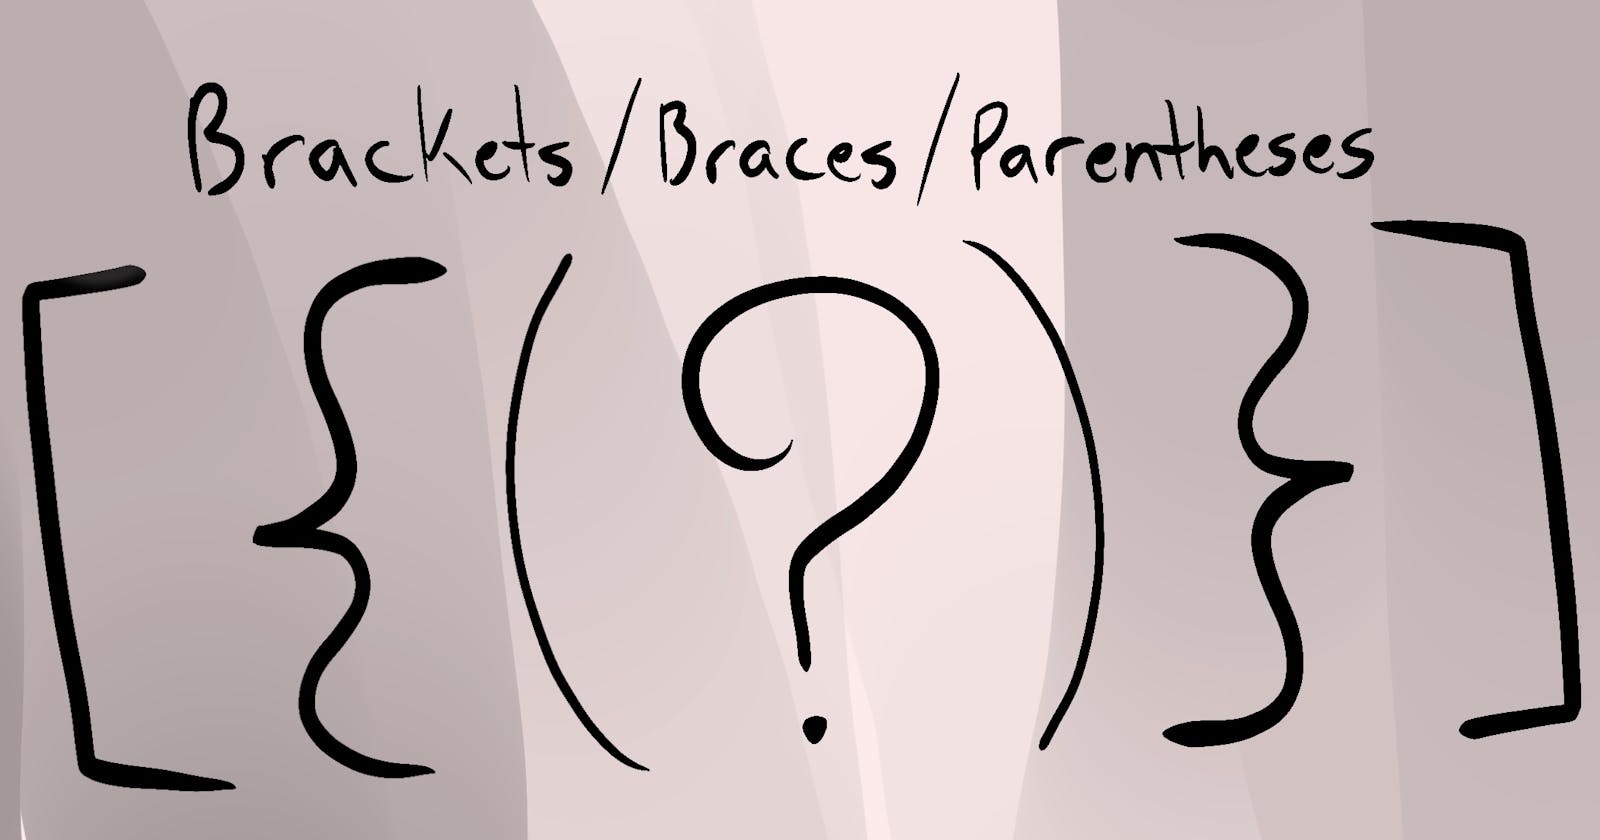 What’s the difference between Brackets, Braces, and Parentheses!